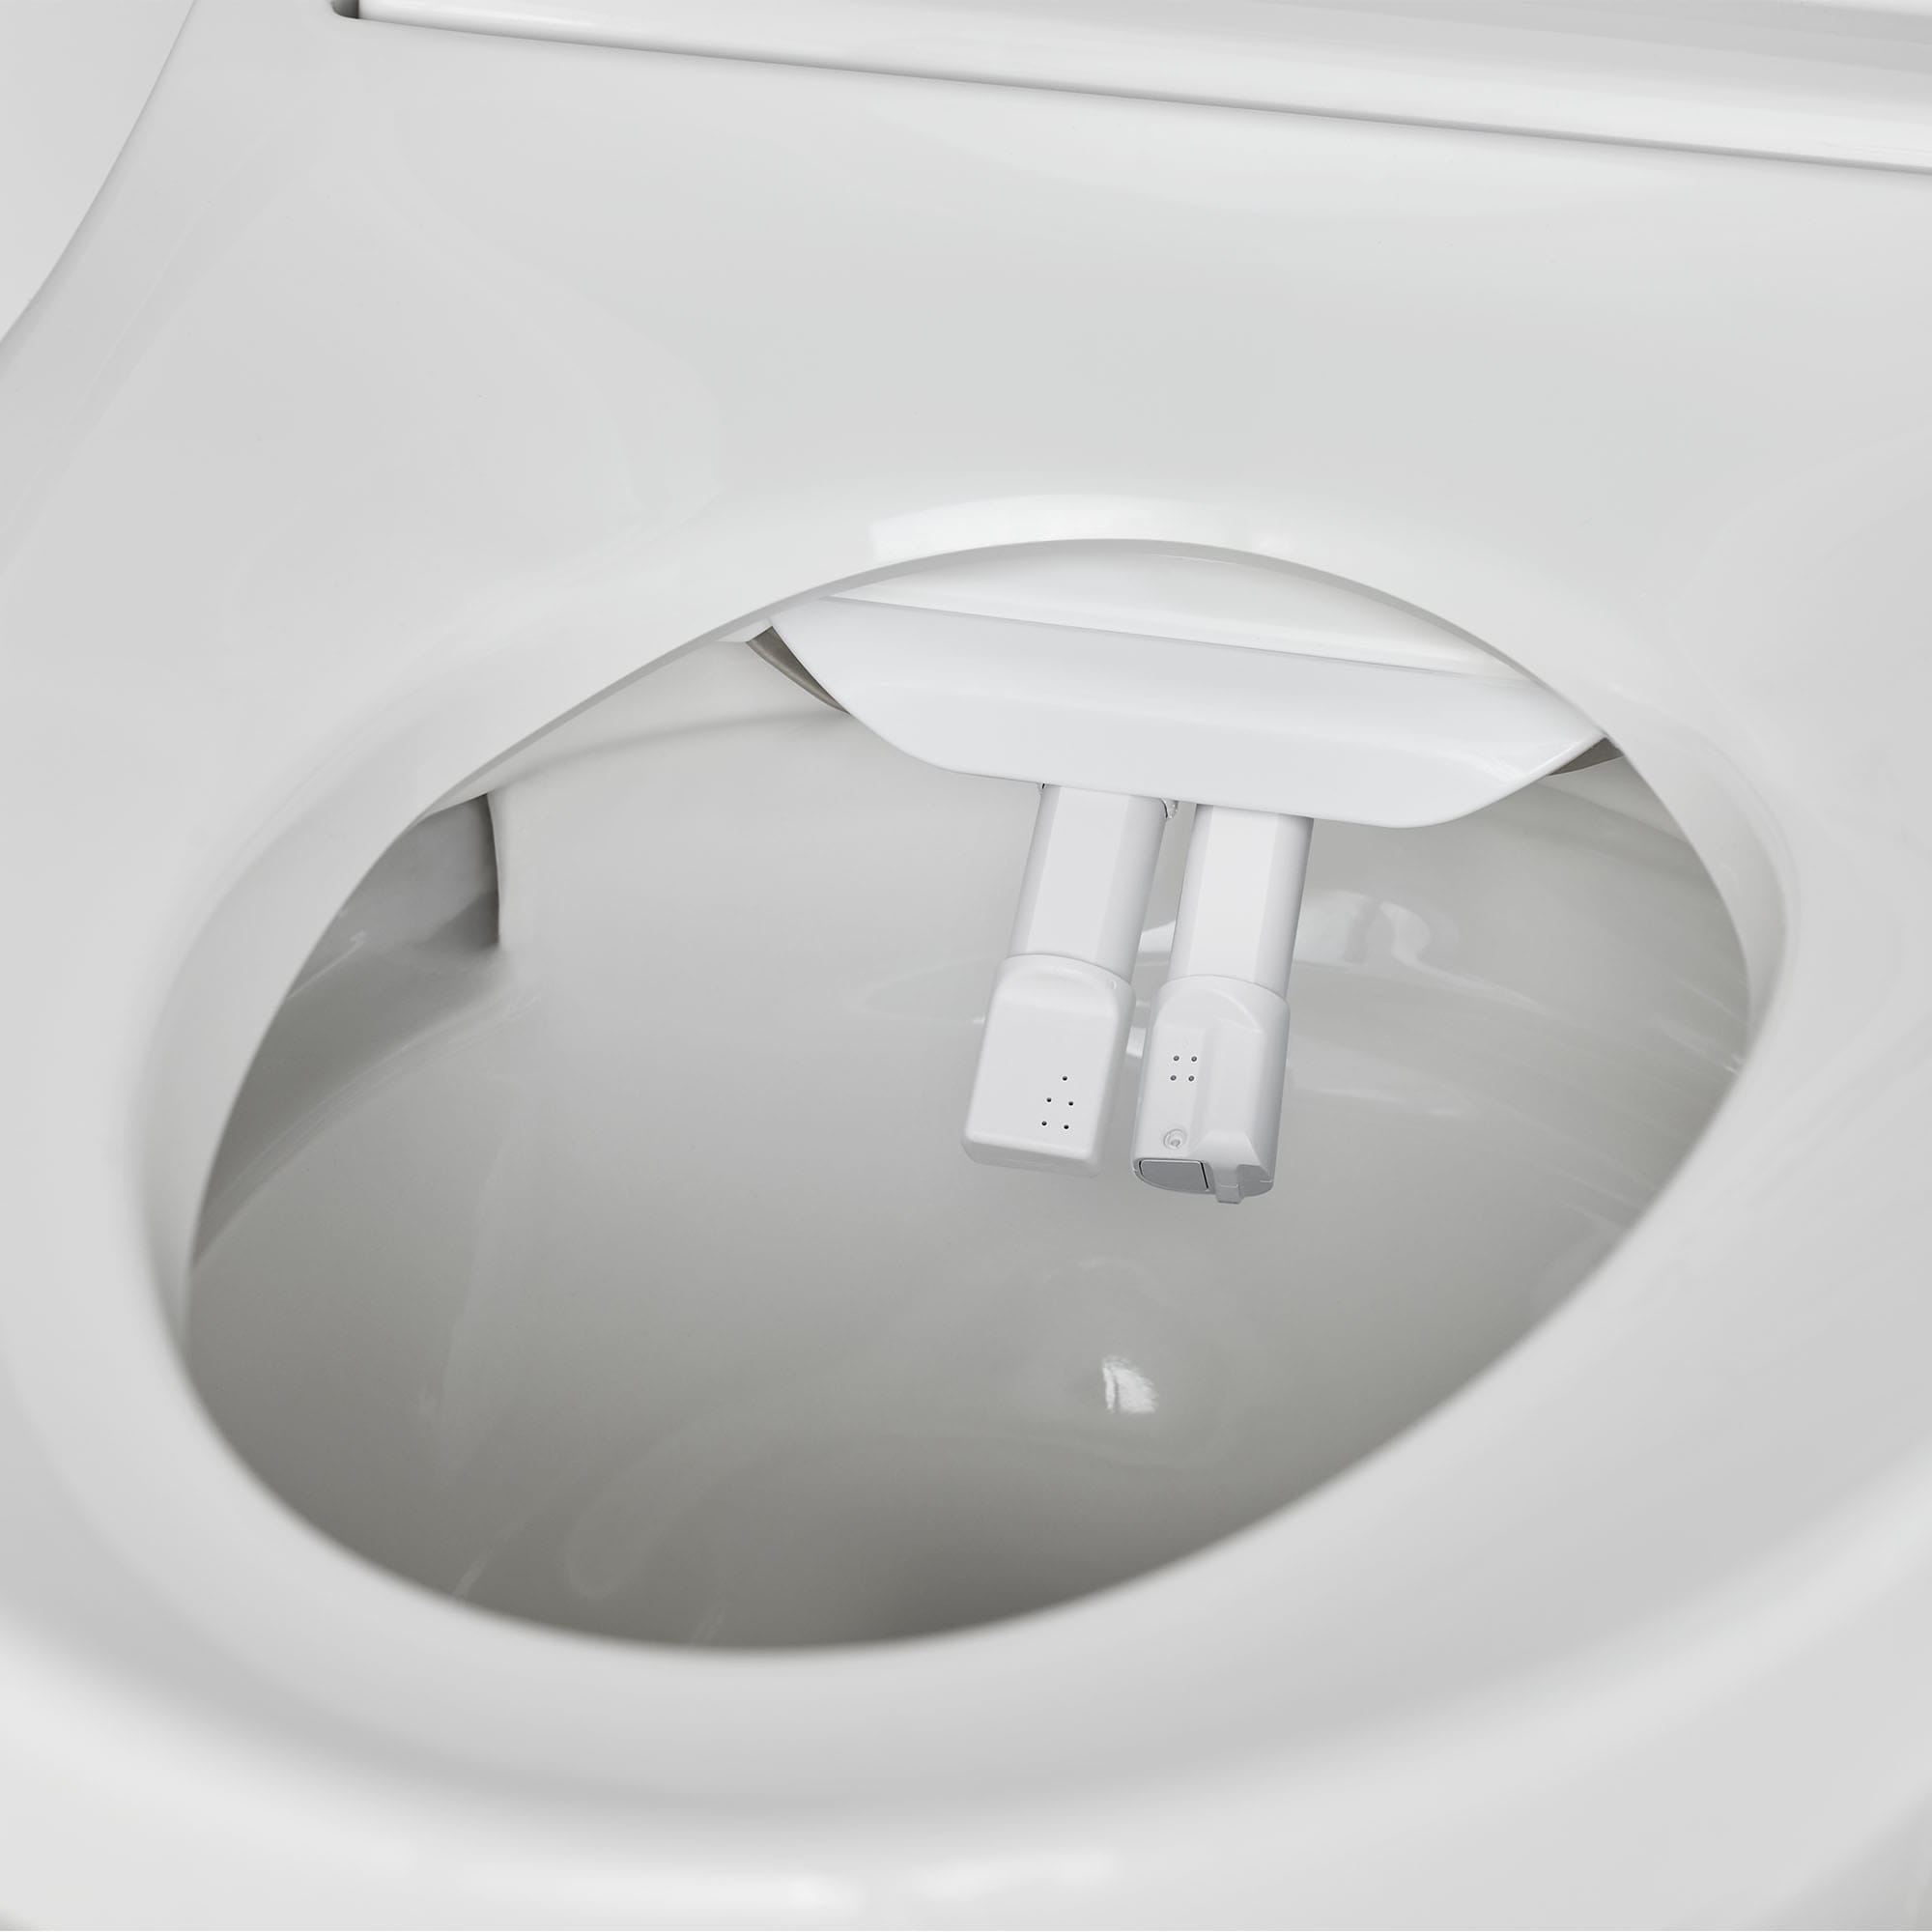 Advanced Clean 30 Electric SpaLet Bidet Seat With Remote Operation WHITE